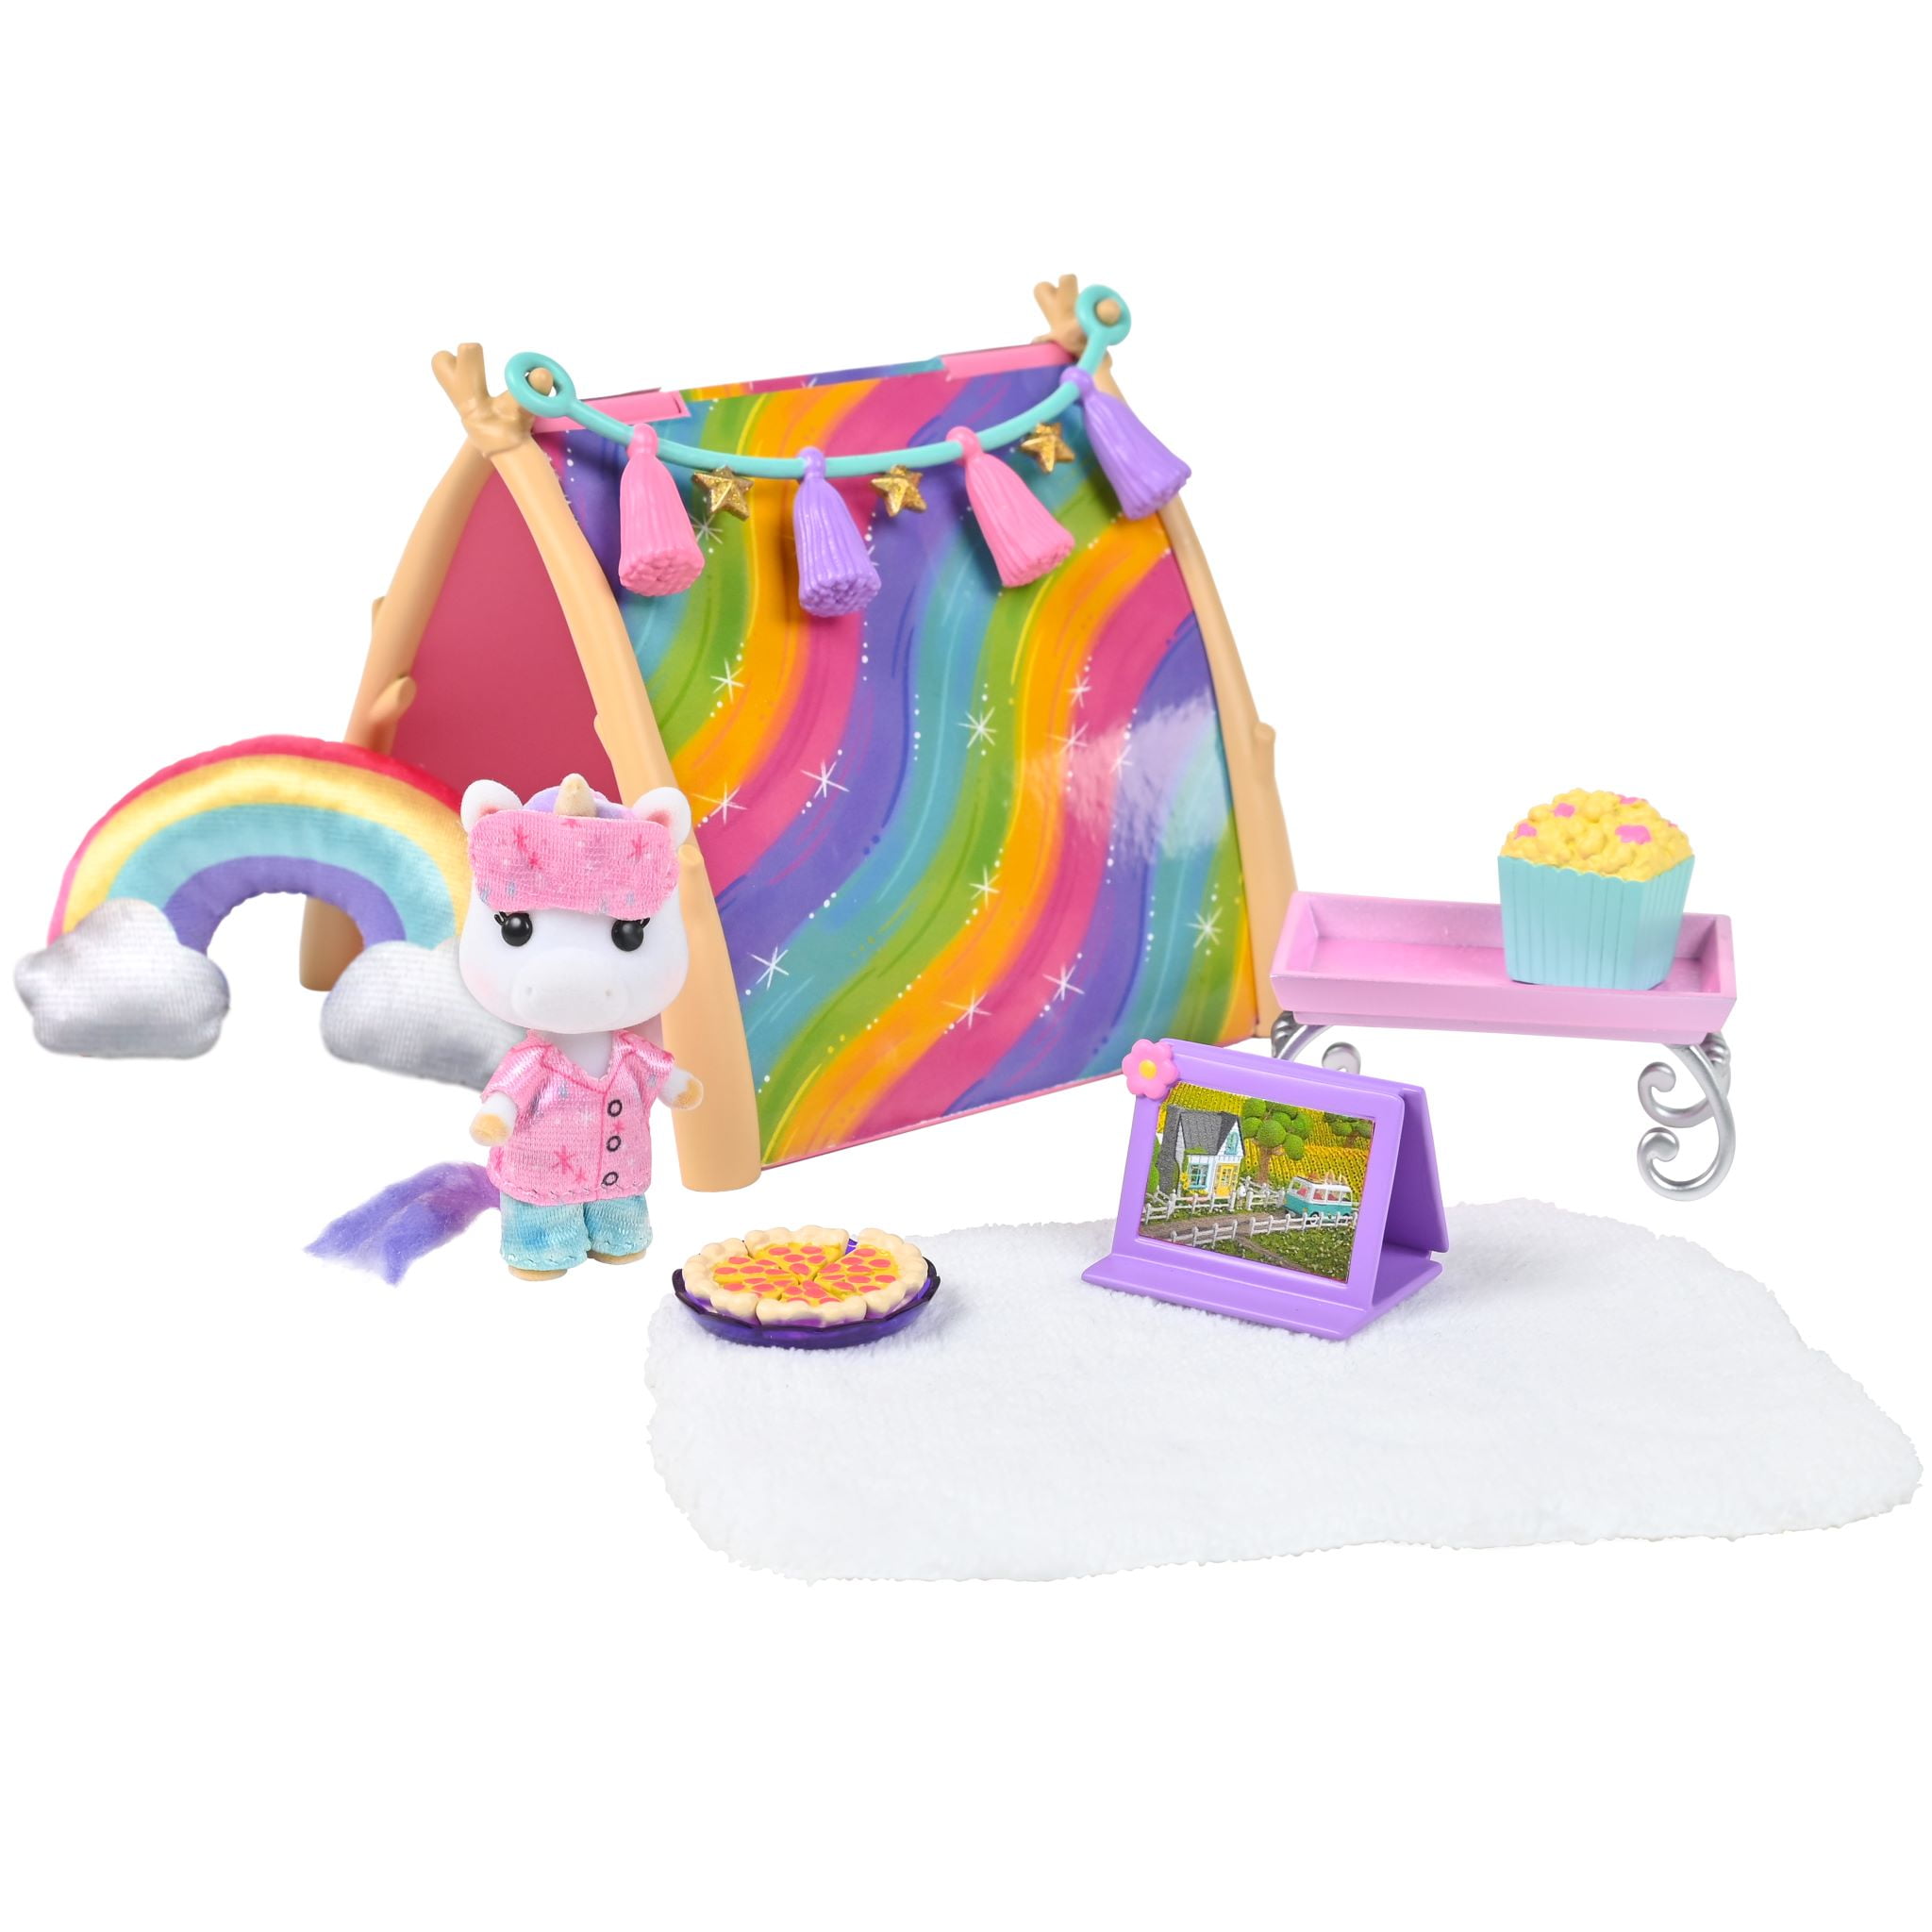 Honey Bee Acres - Rainbow Ridge Collection, Sweet Dreams Pajama Party, Complete set with Miniature Doll Figure, 15 Pieces, Ages 3 and up